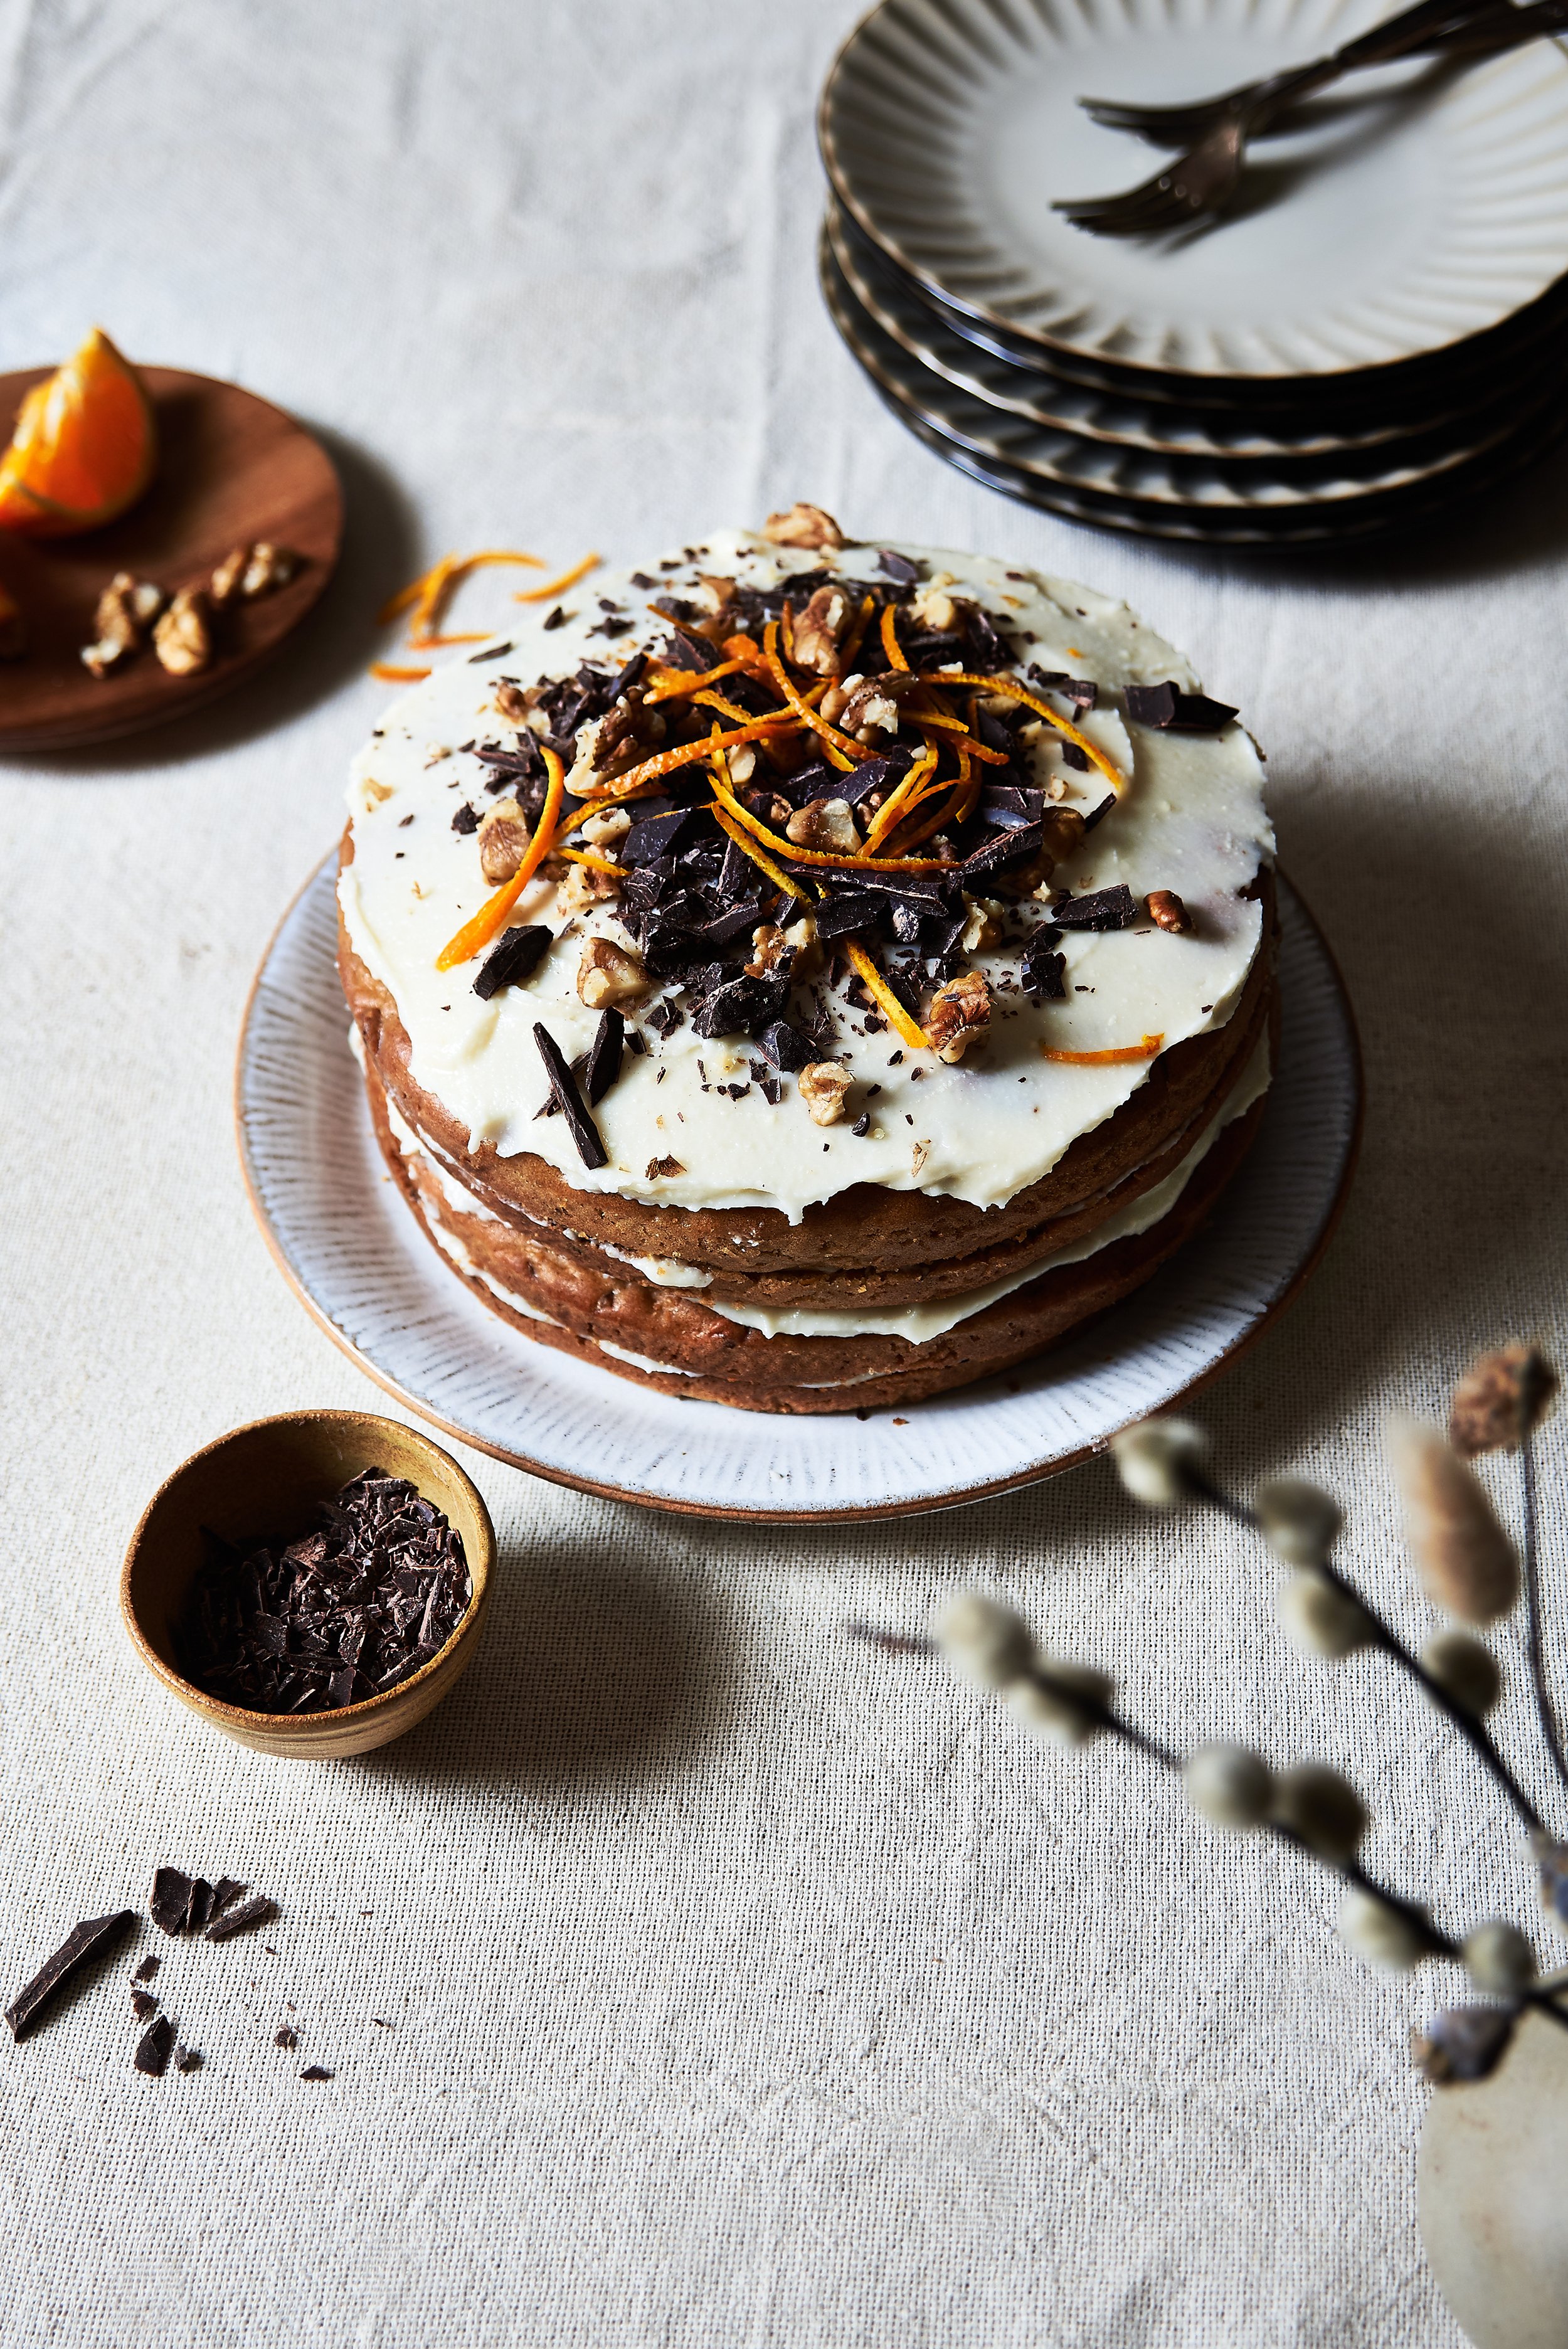 A beautifully decorated Carrot cake on a plate